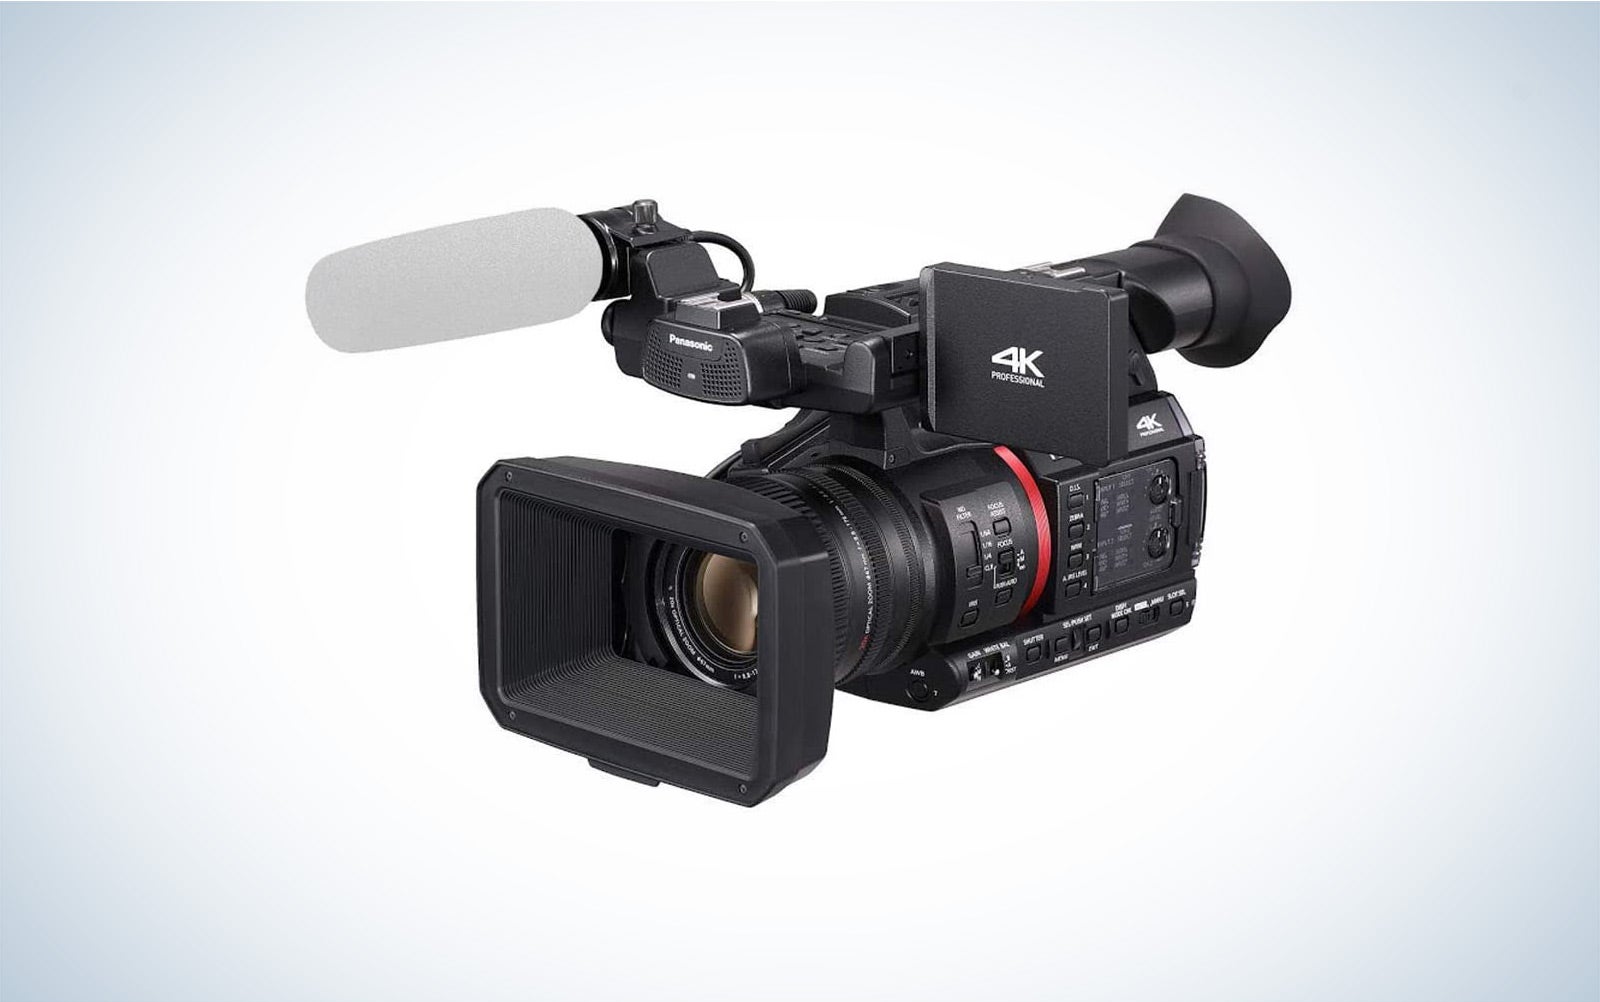 The Panasonic AG-CX350 4K Camcorder is the best fixed-lens camera.